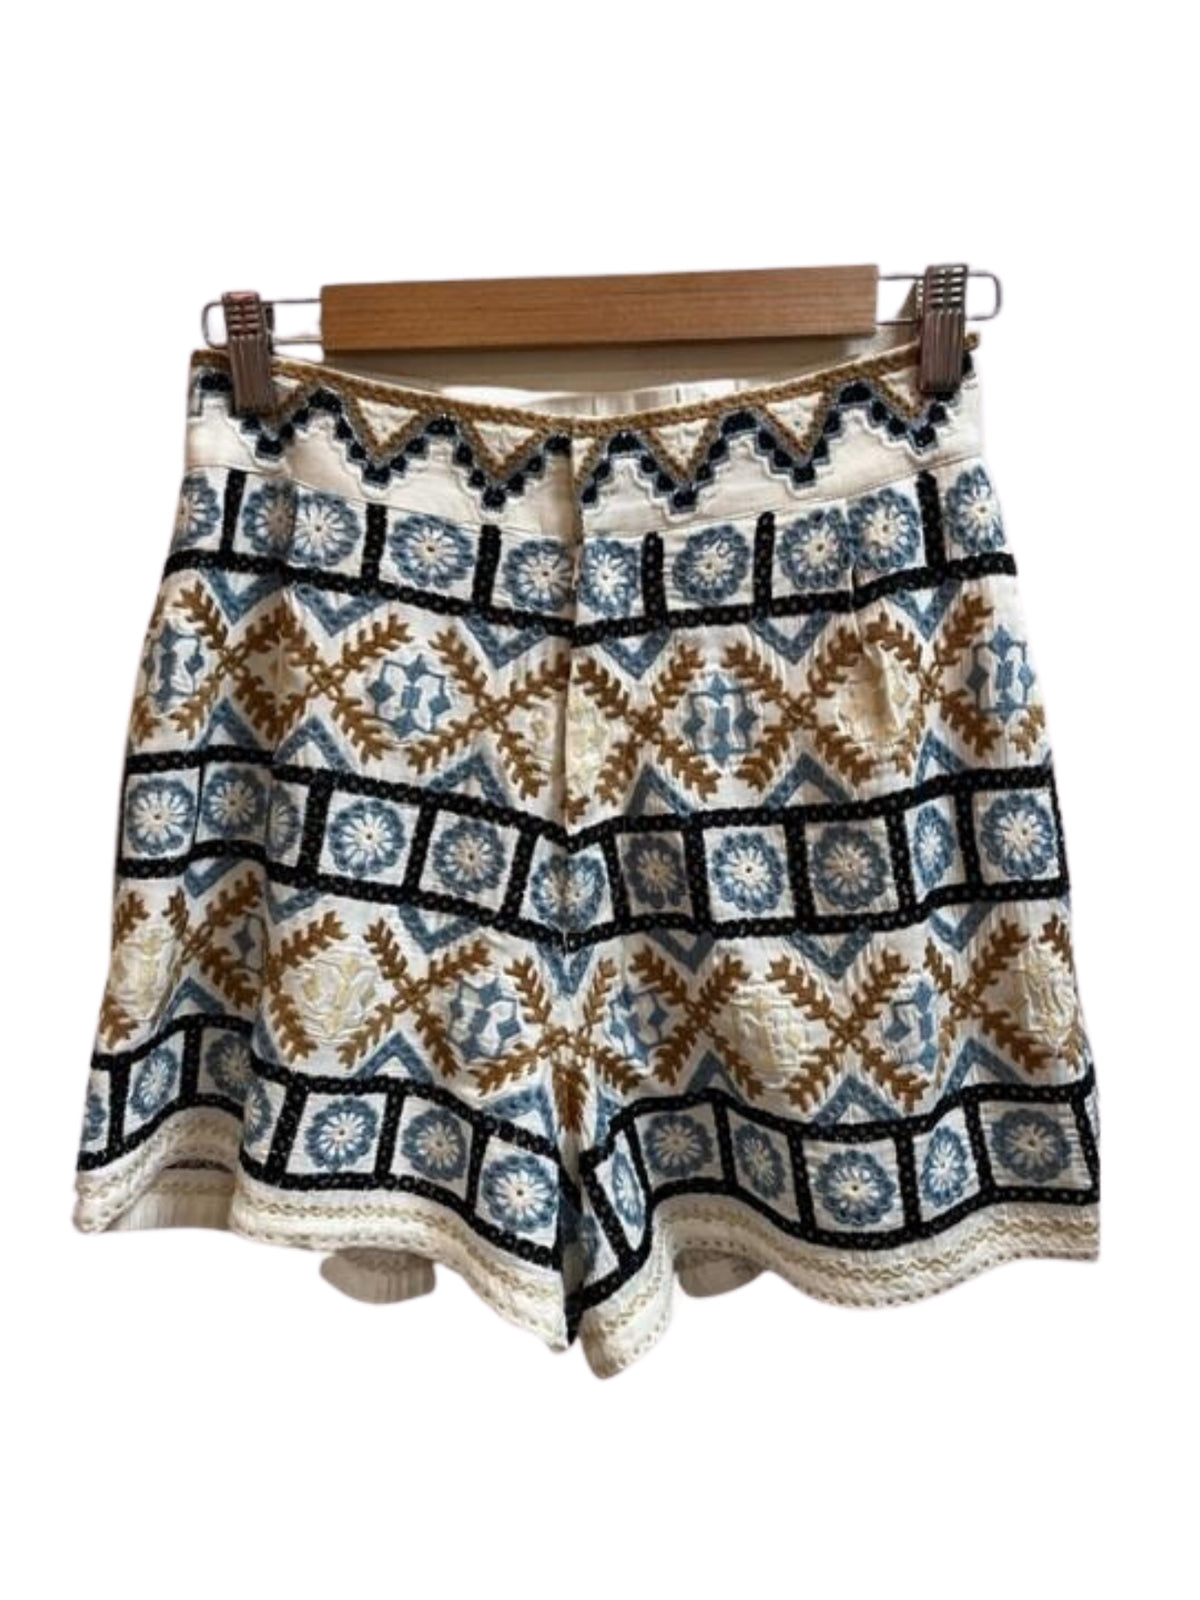 Coyote Shorts